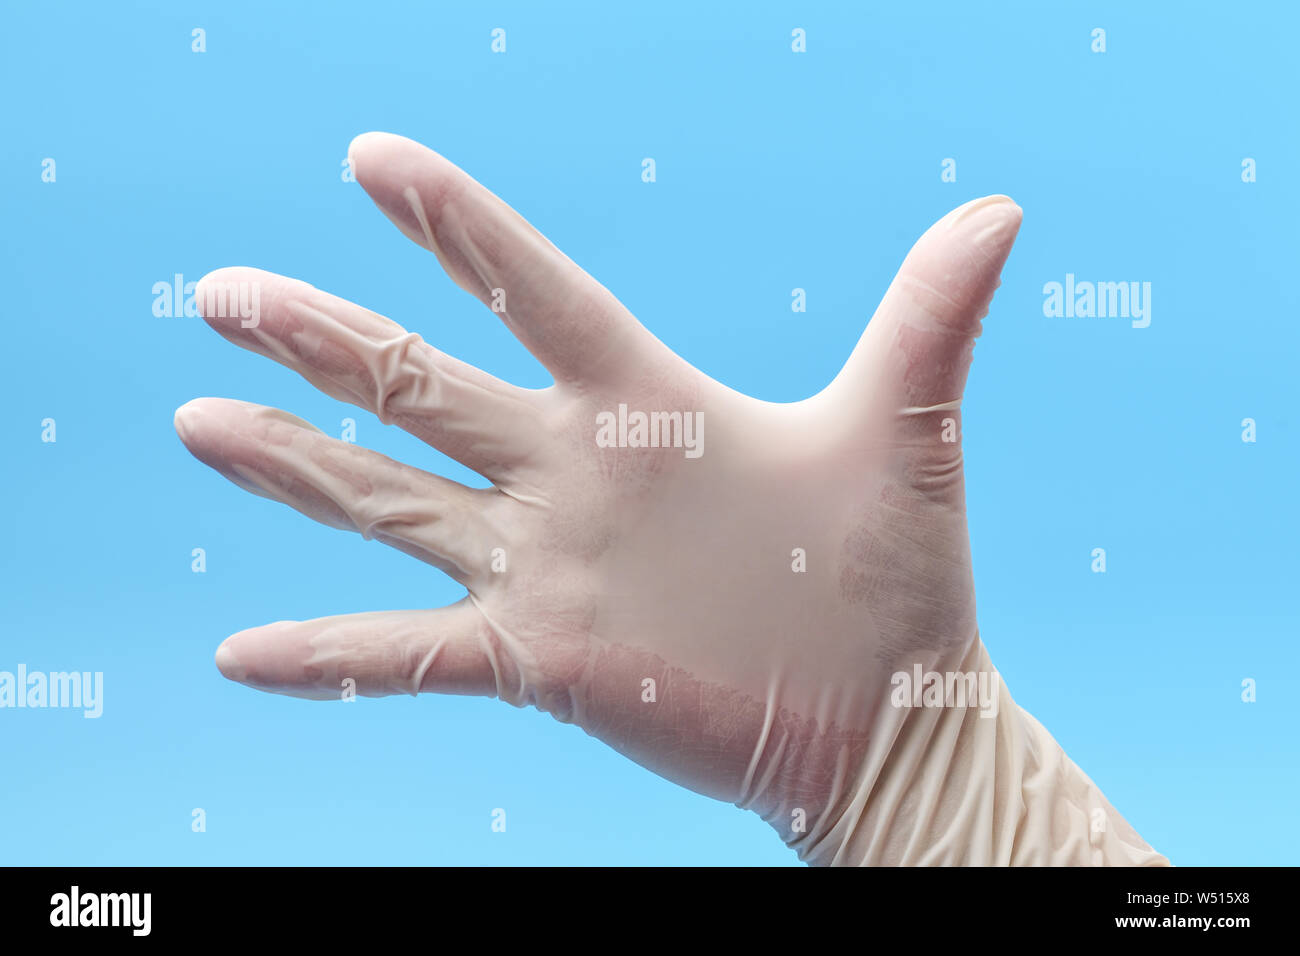 Hand Wearing Protective or Surgical Gloves on a Blue Background. Hand in white medical gloves , in position open palm. Medical background. Stock Photo